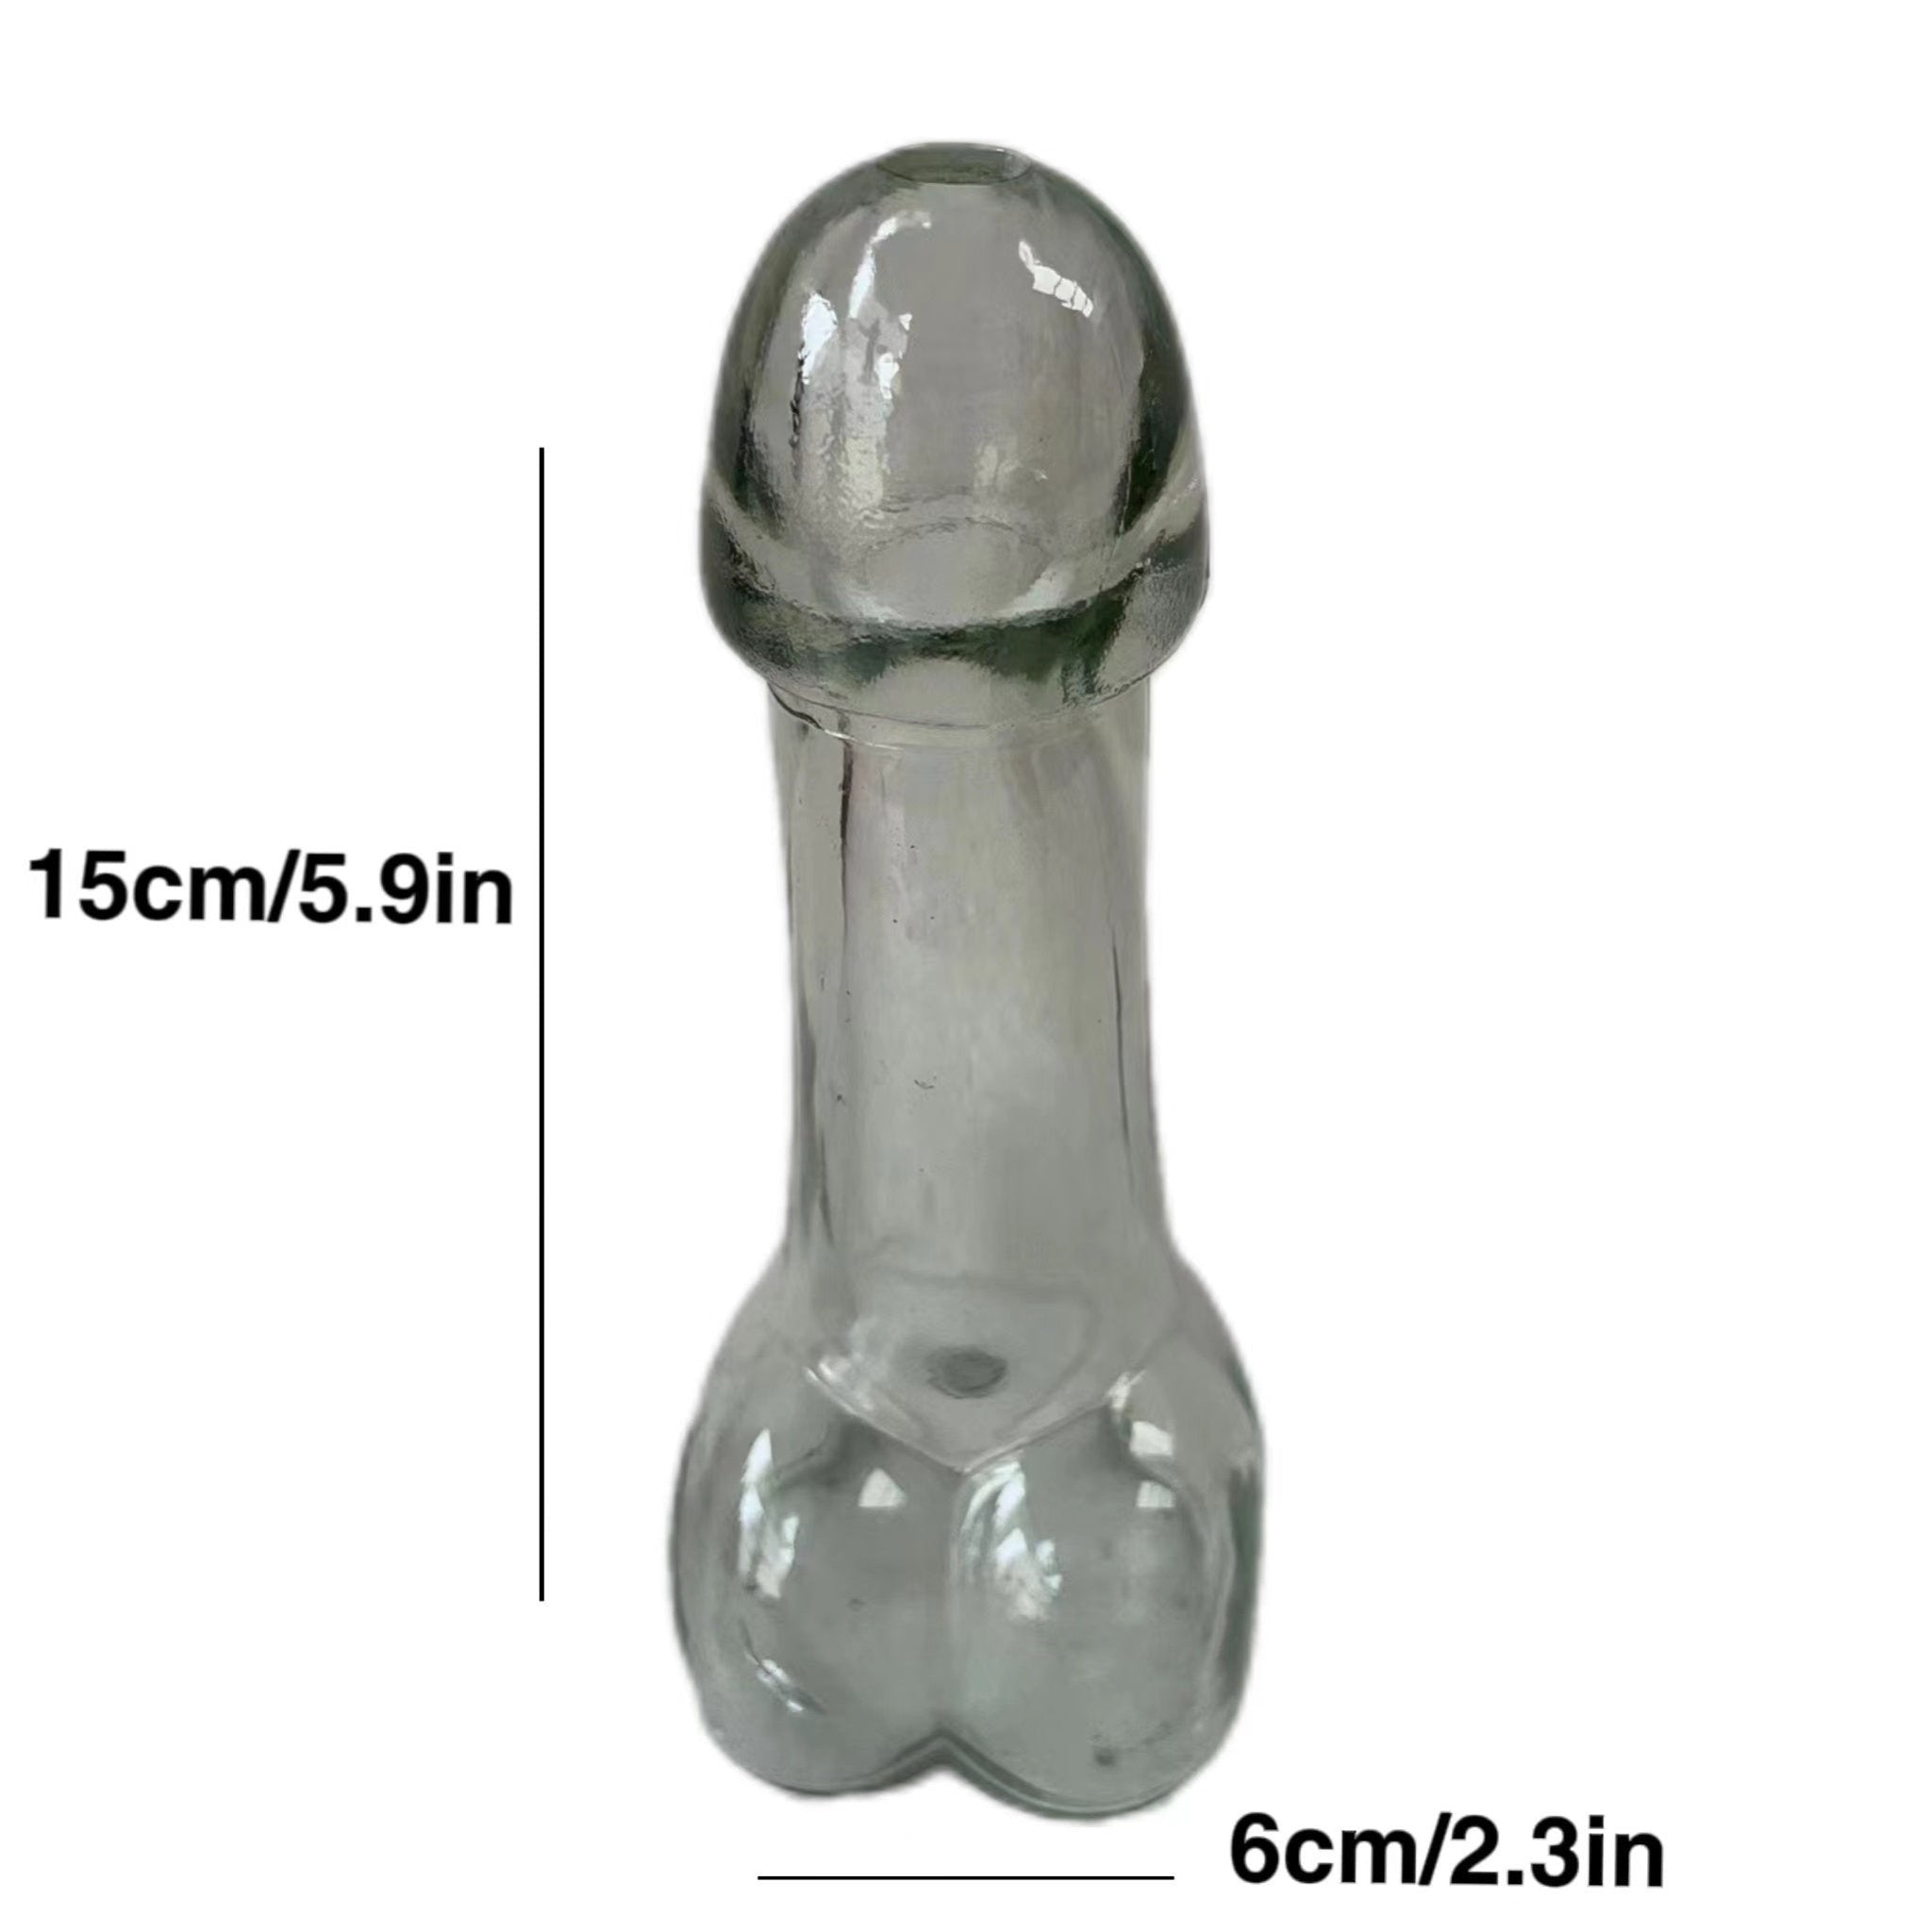 1pc, Dick-Shaped Cocktail Glasses - Fun and Creative Wine and Champagne Glasses for Bar, Pub, Club, Restaurant, and Home Use - Perfect Summer Drinkware Accessories - Le Coin Du Barman : Le Spécialiste Des Cocktails